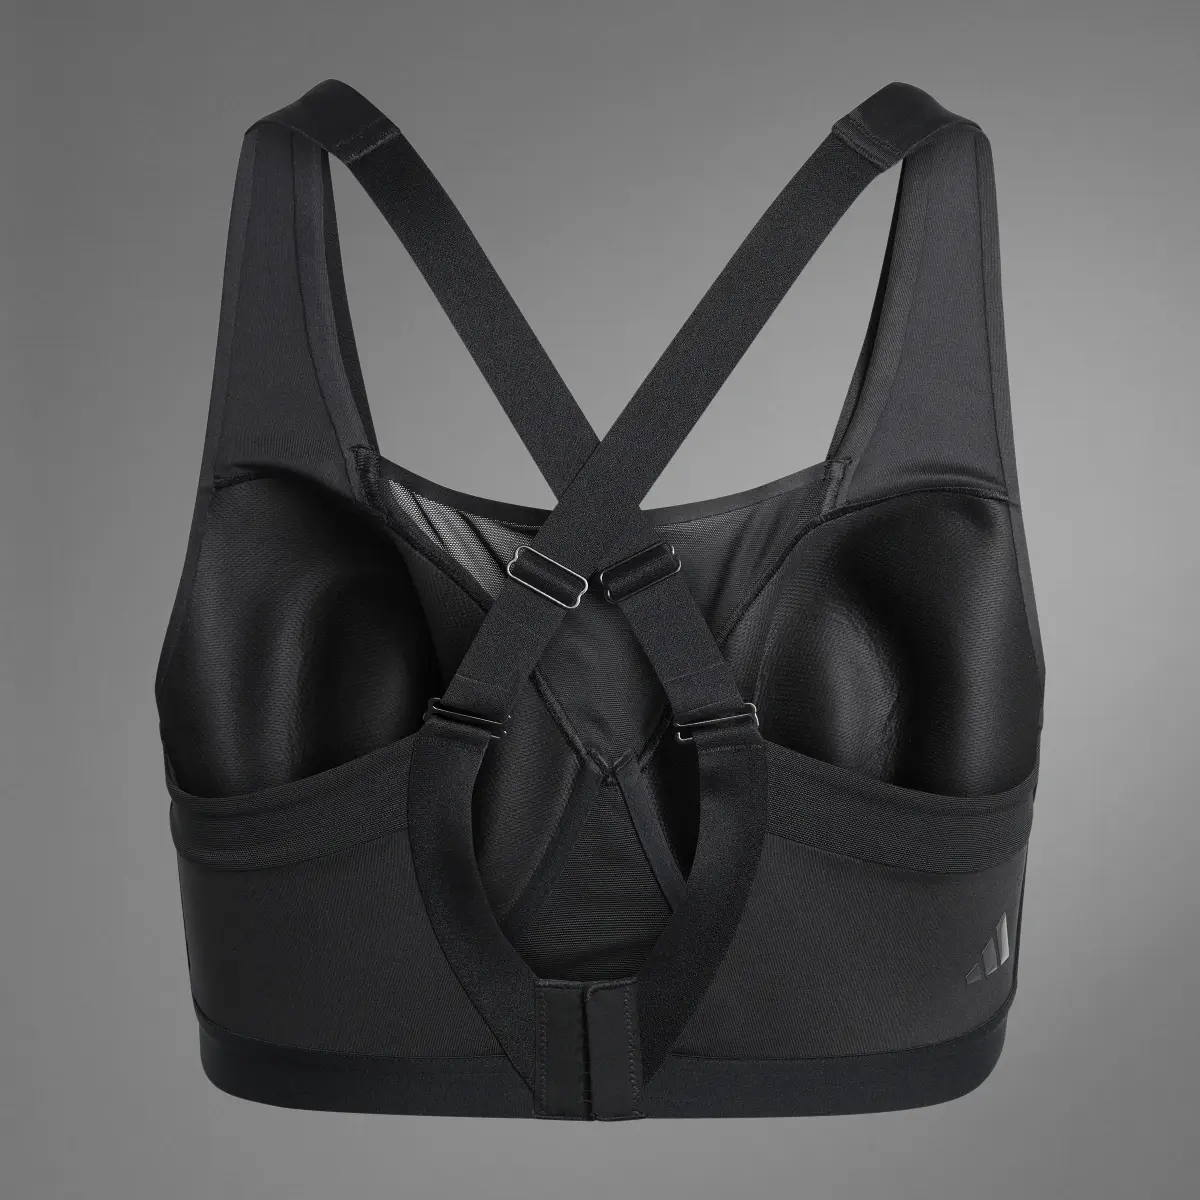 Adidas TLRD Impact Luxe High Support Bra (Plus Size). 3